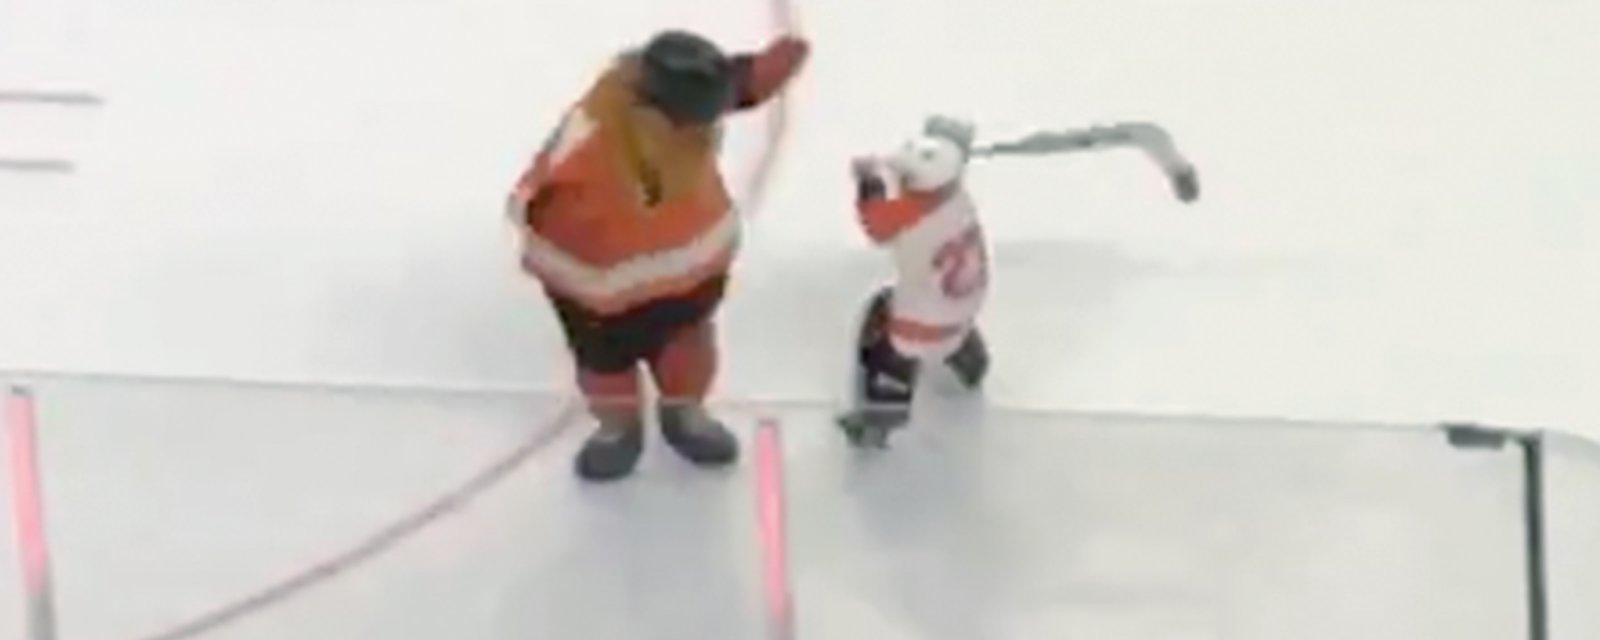 Pint sized goalie attacks Gritty!